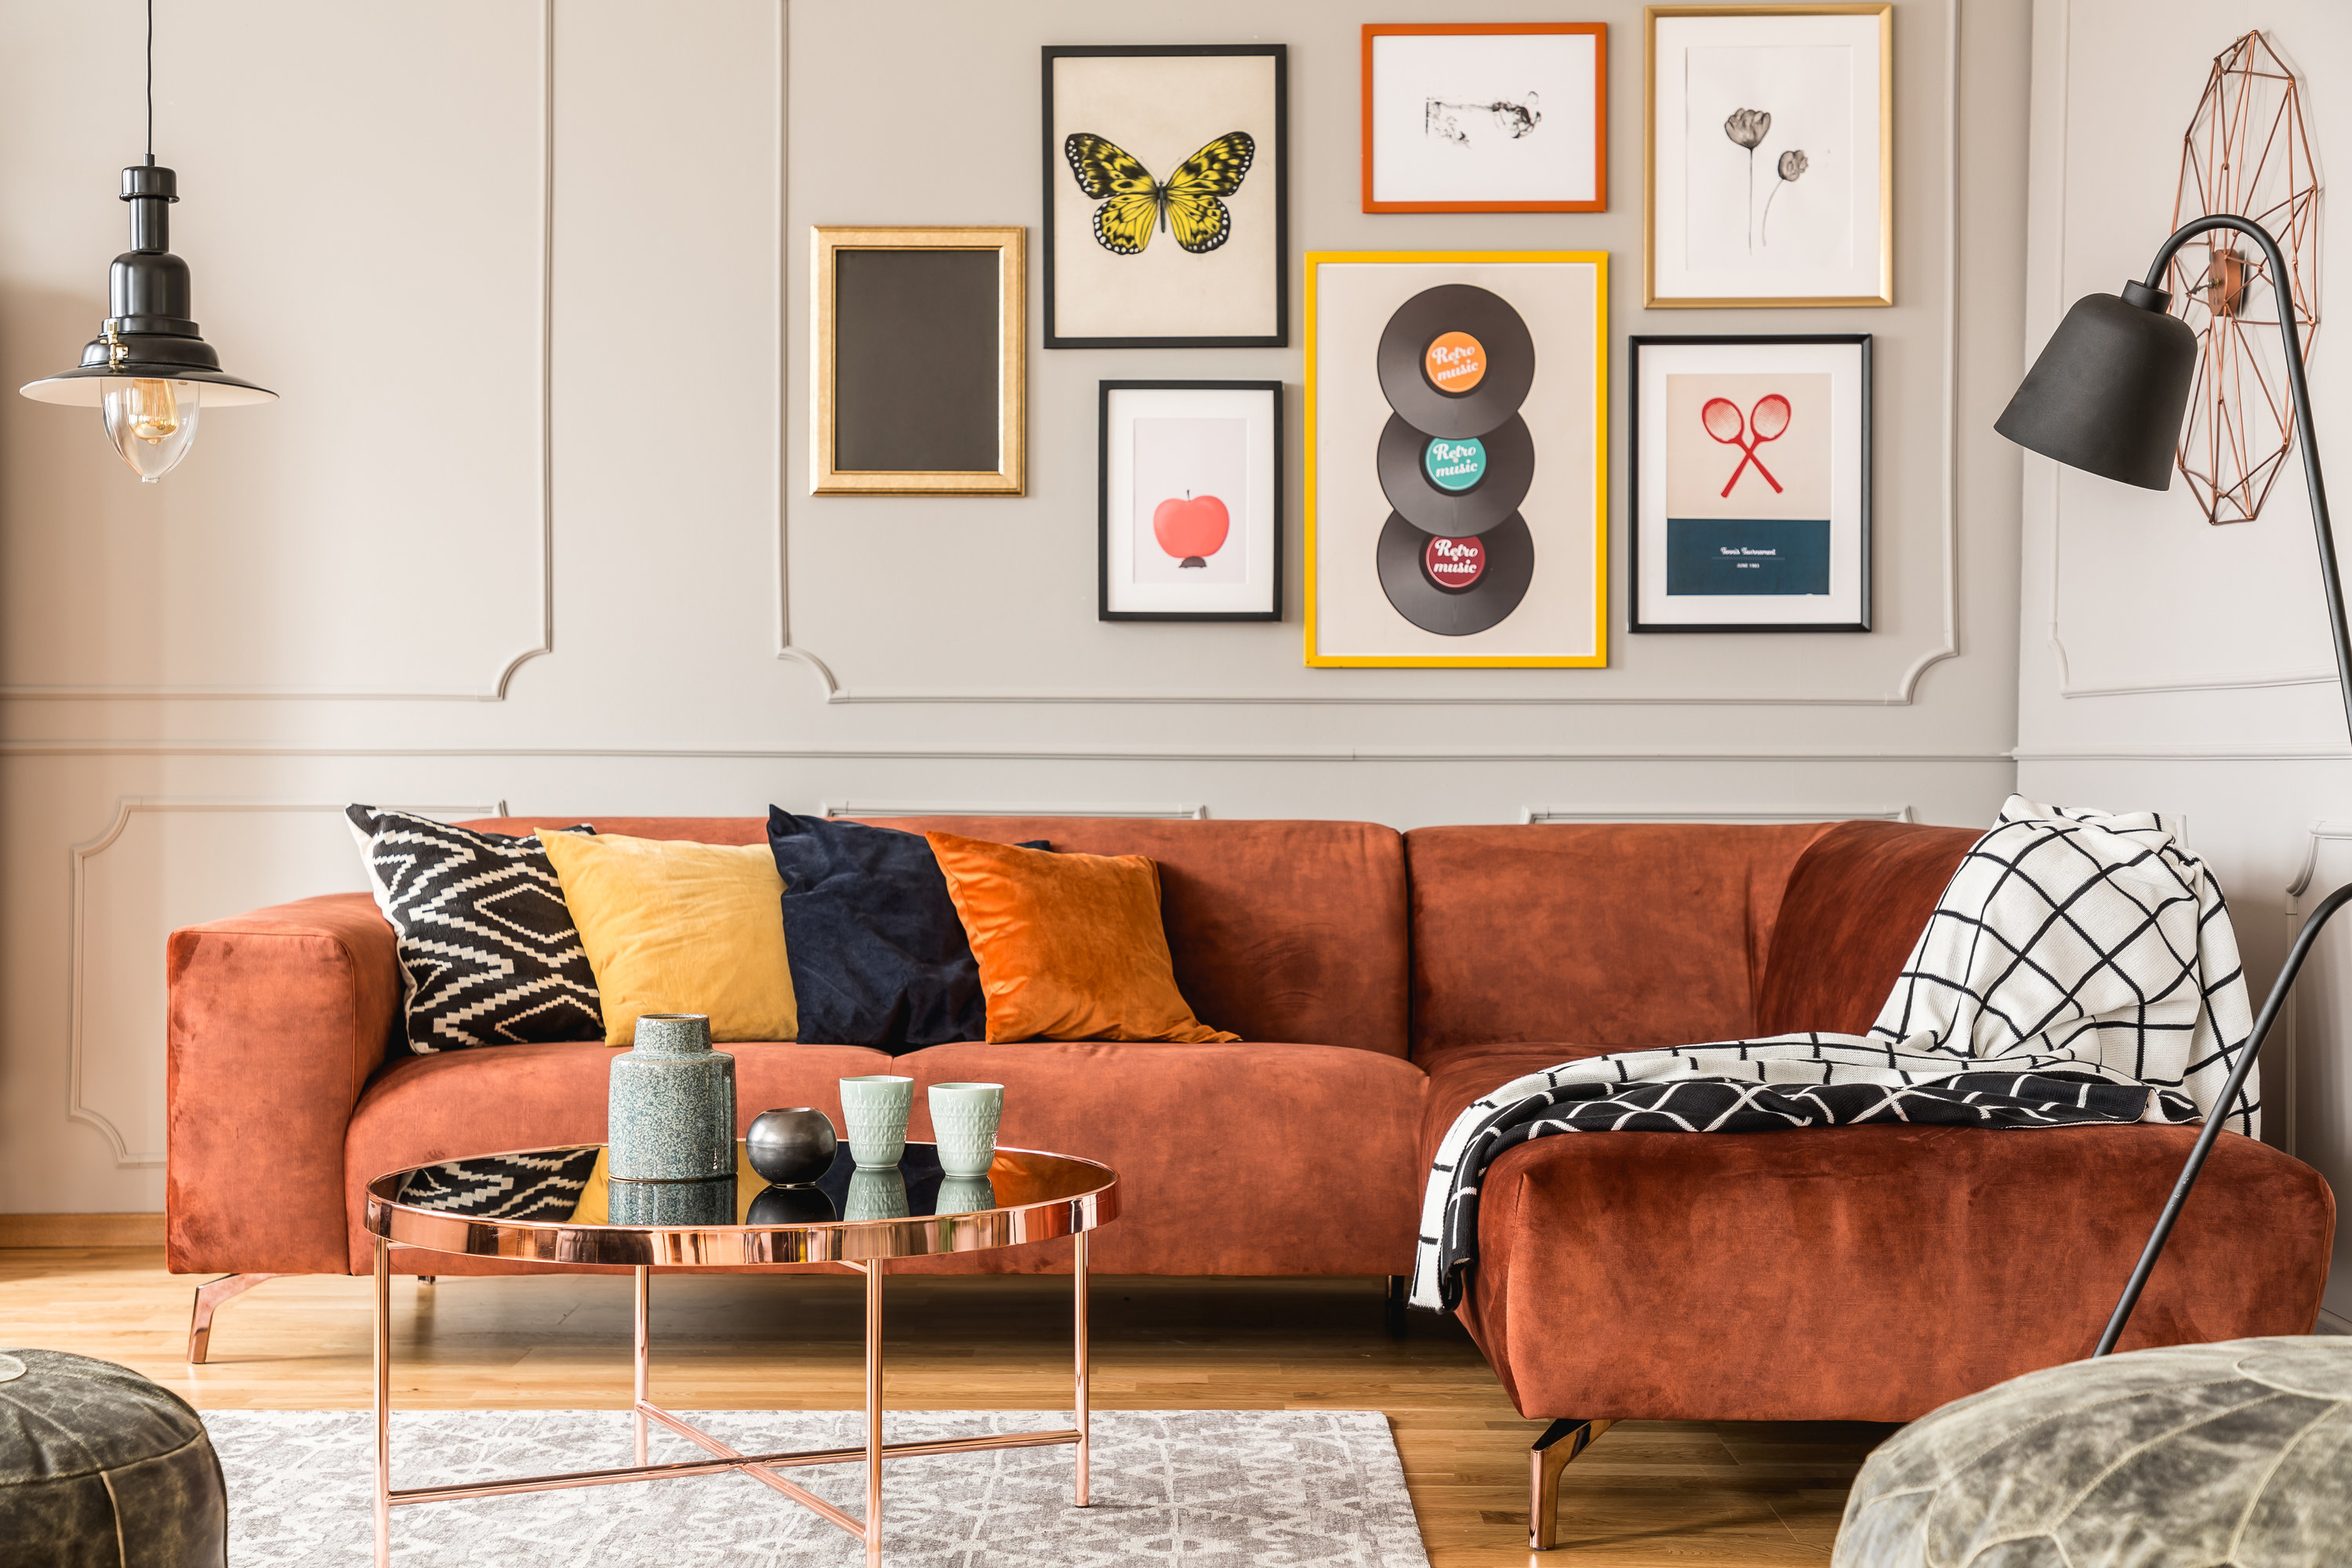 A living room with a bright orange sofa, the wall behind it is covered in photo frames